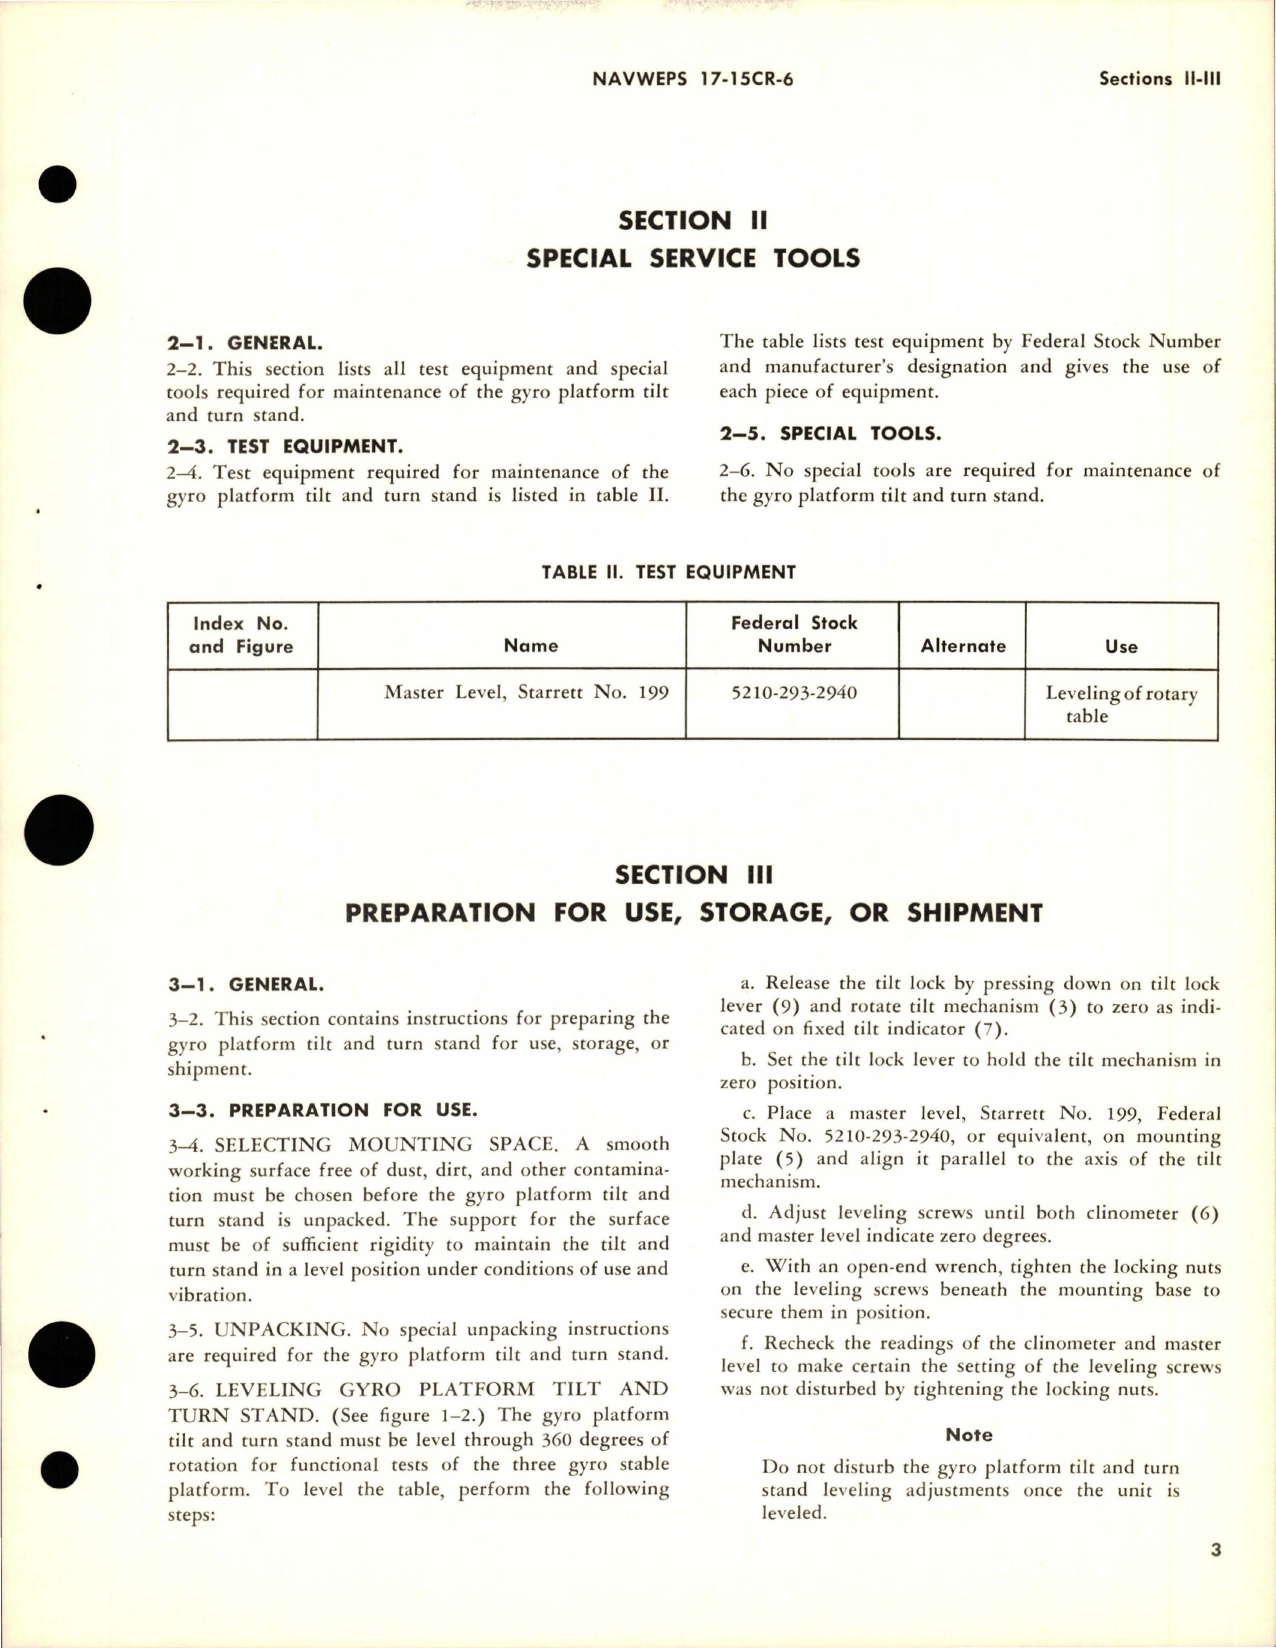 Sample page 7 from AirCorps Library document: Operation and Service Instructions with Illustrated Parts for Tilt and Turn Stand - Part KT426913